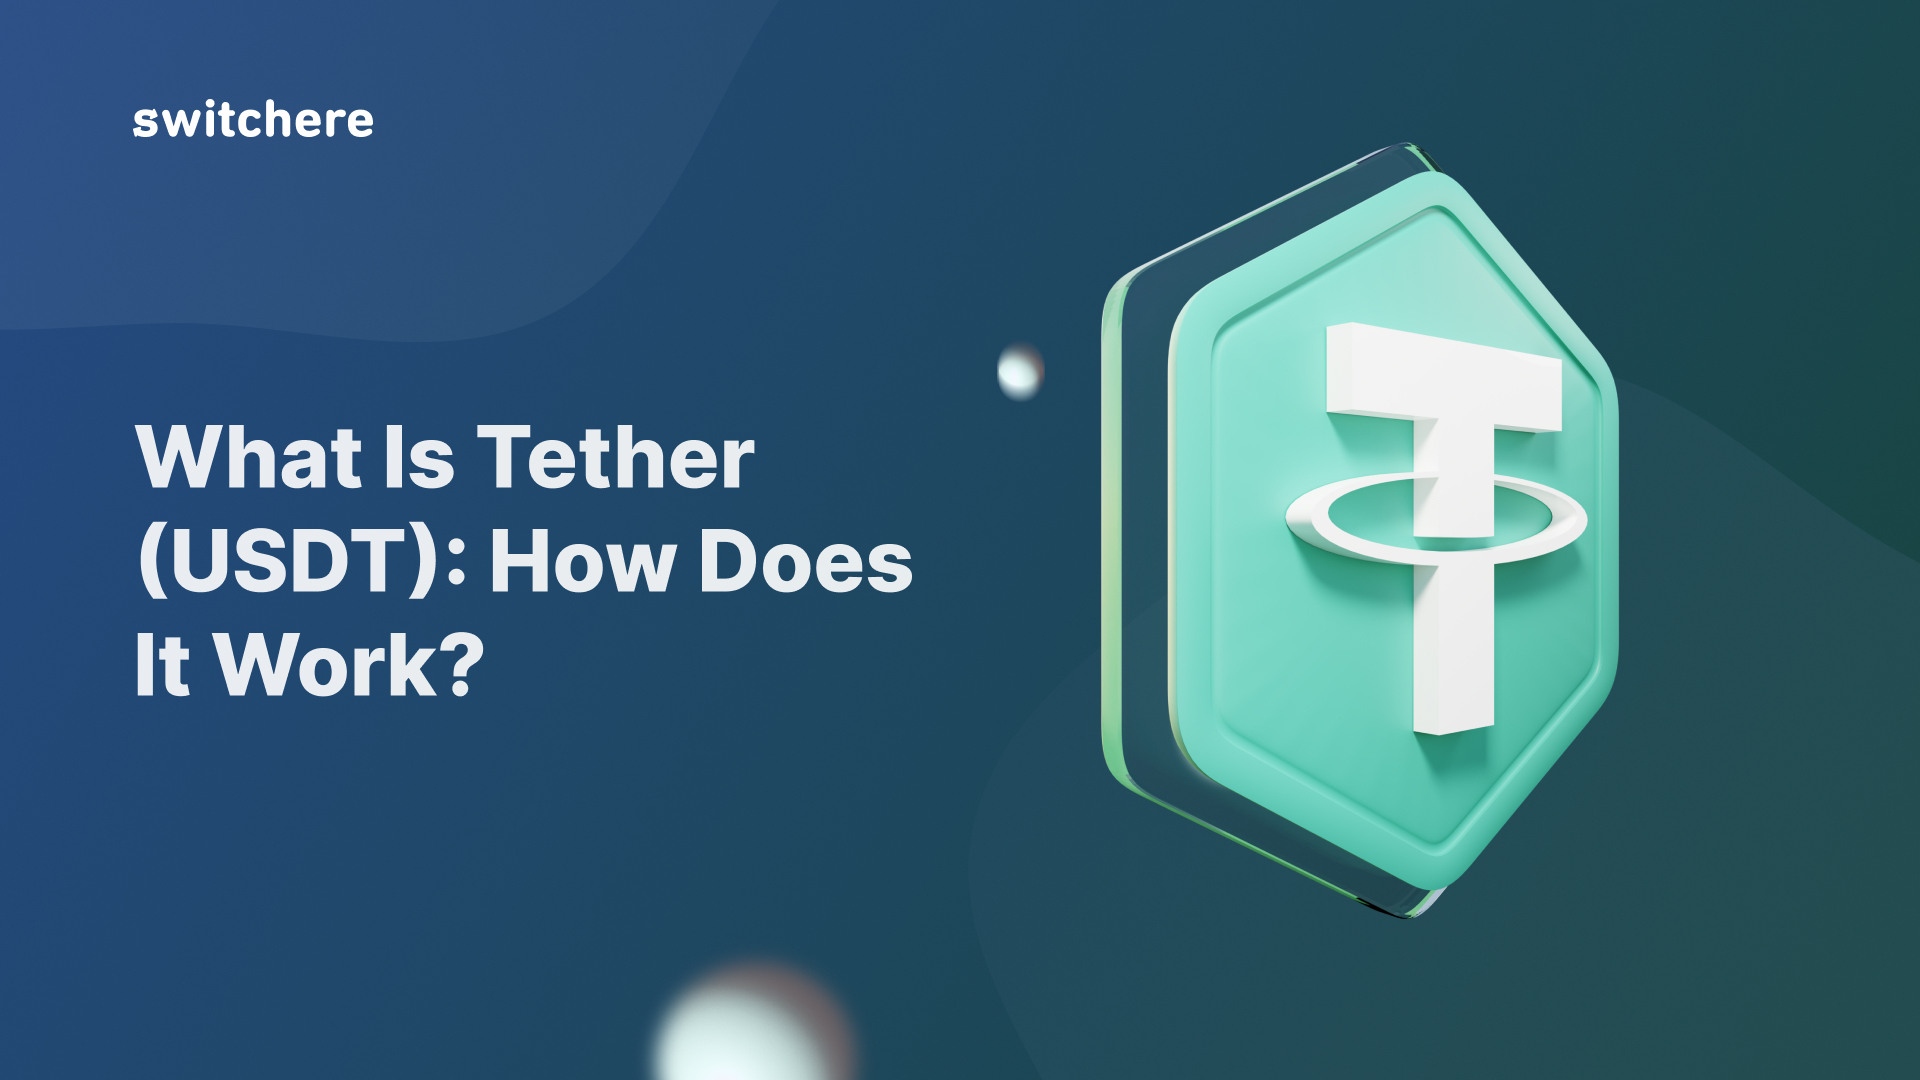 What Is Tether, And How Does It Work? | UTORG